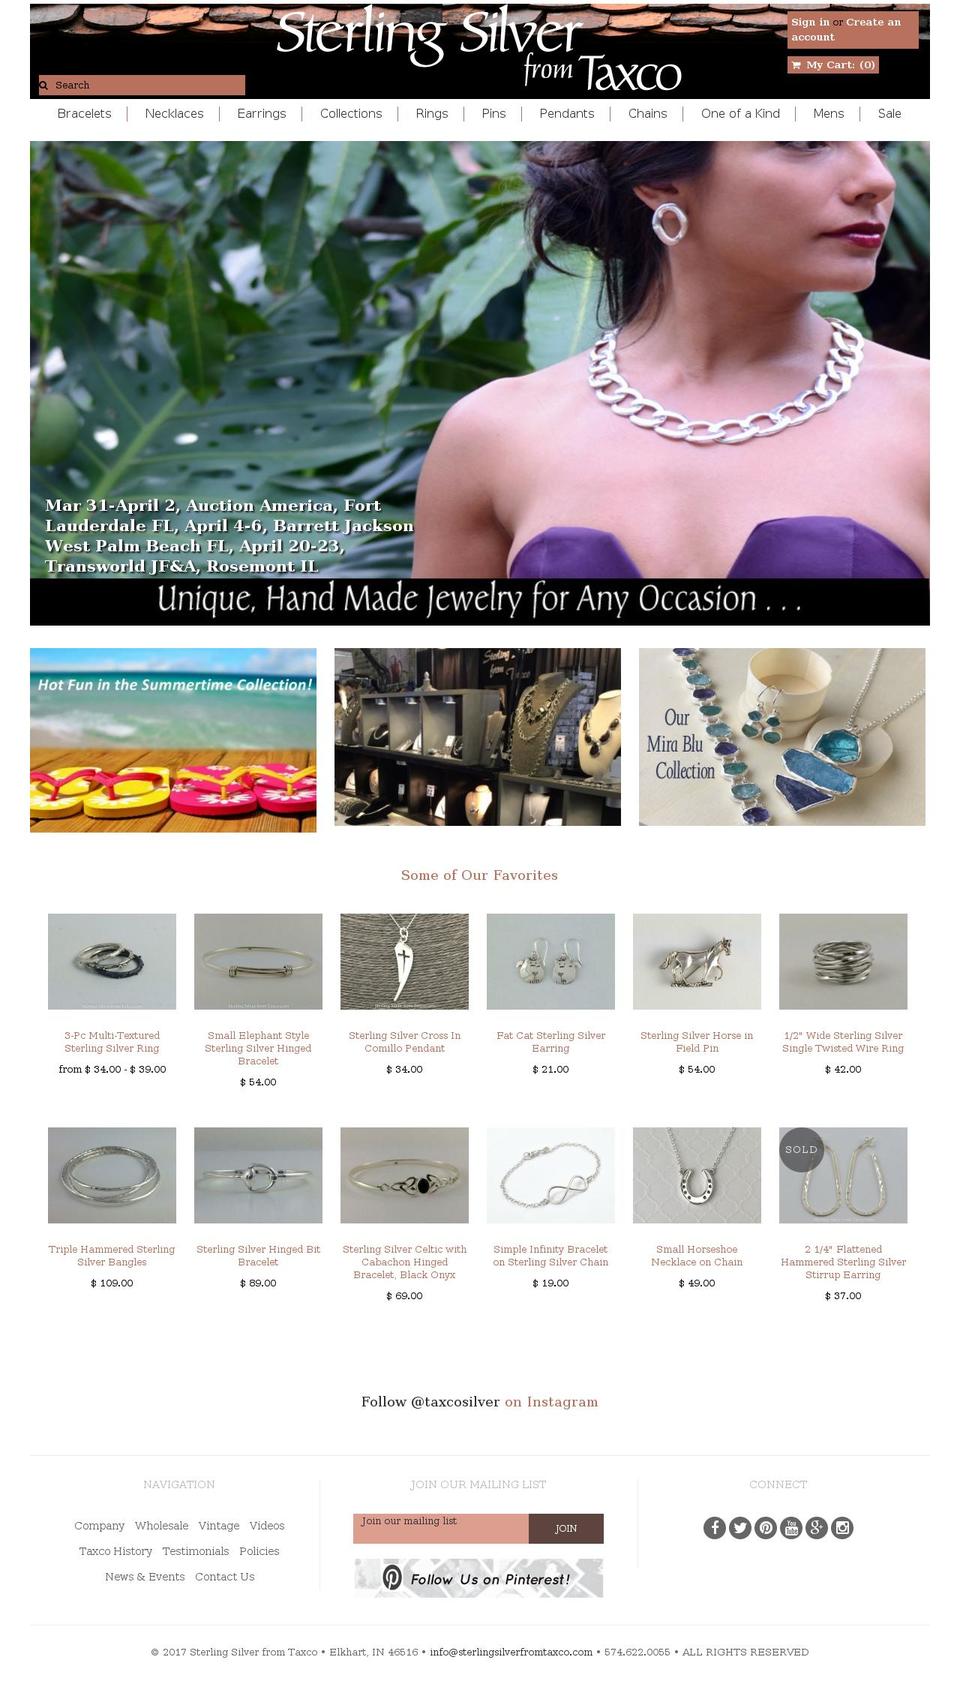 Canopy Shopify theme site example sterlingsilverfromtaxco.com